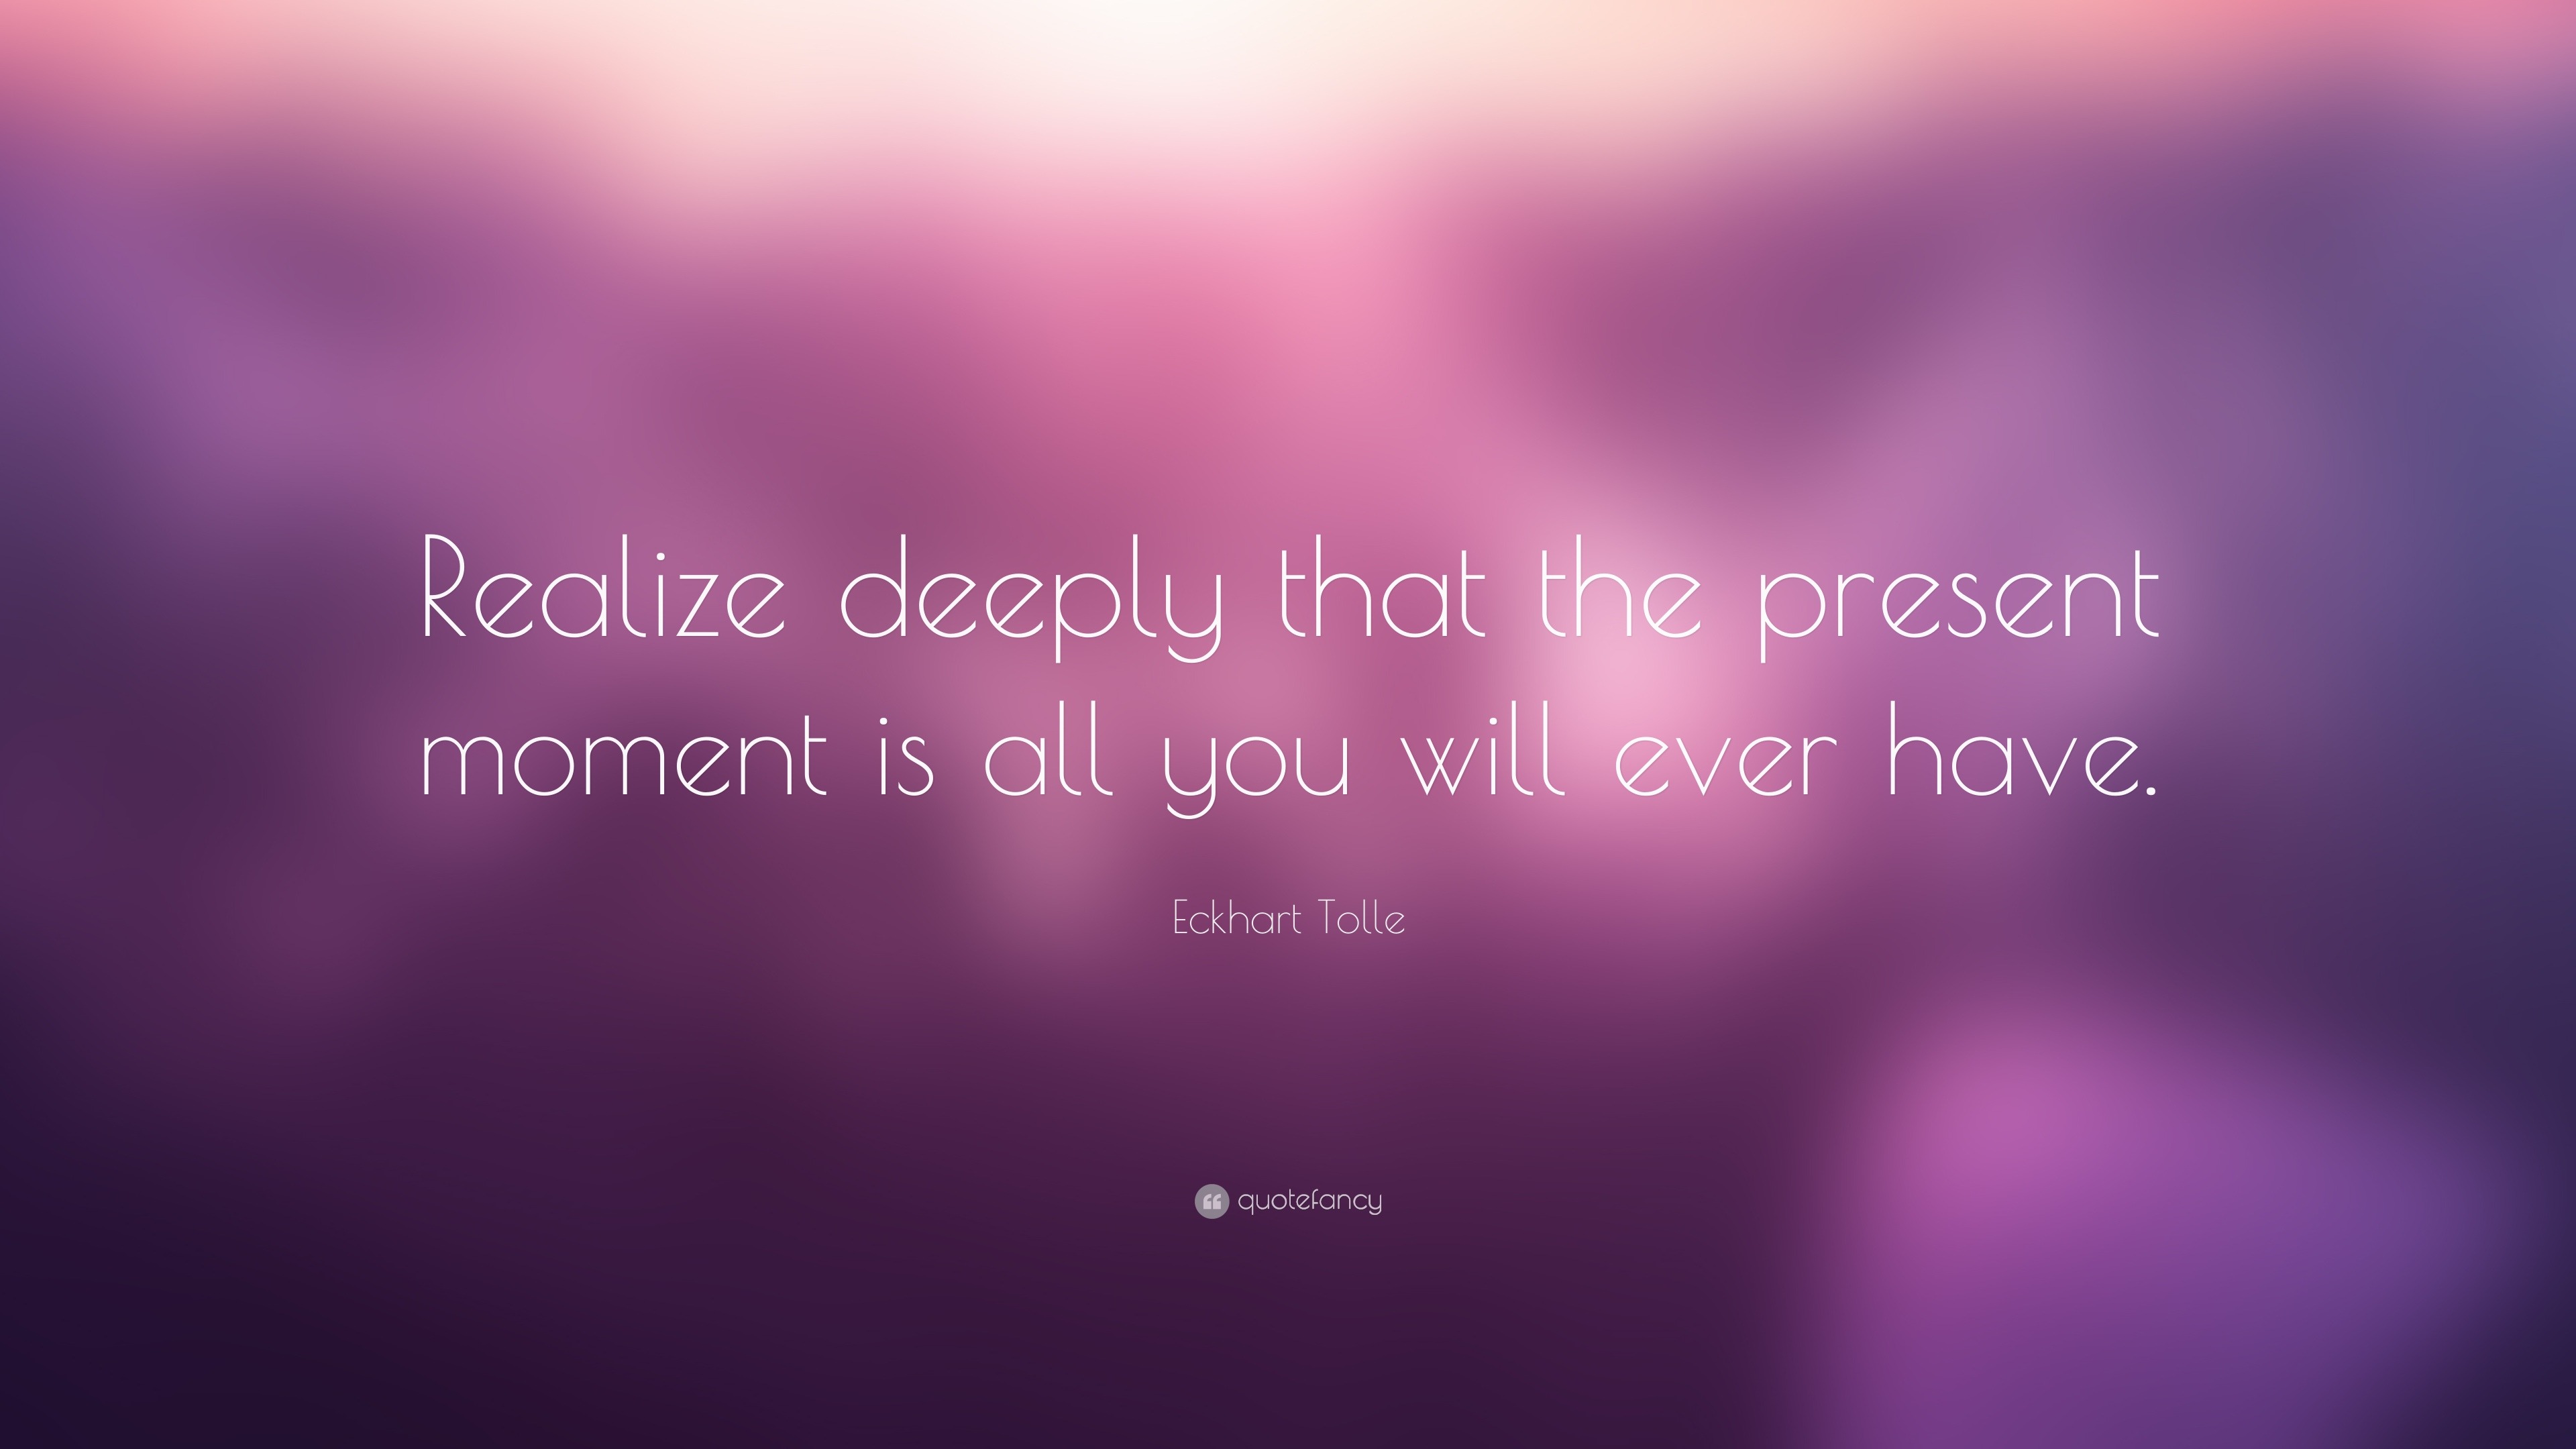 Eckhart Tolle Quote: “Realize deeply that the present moment is all you ...